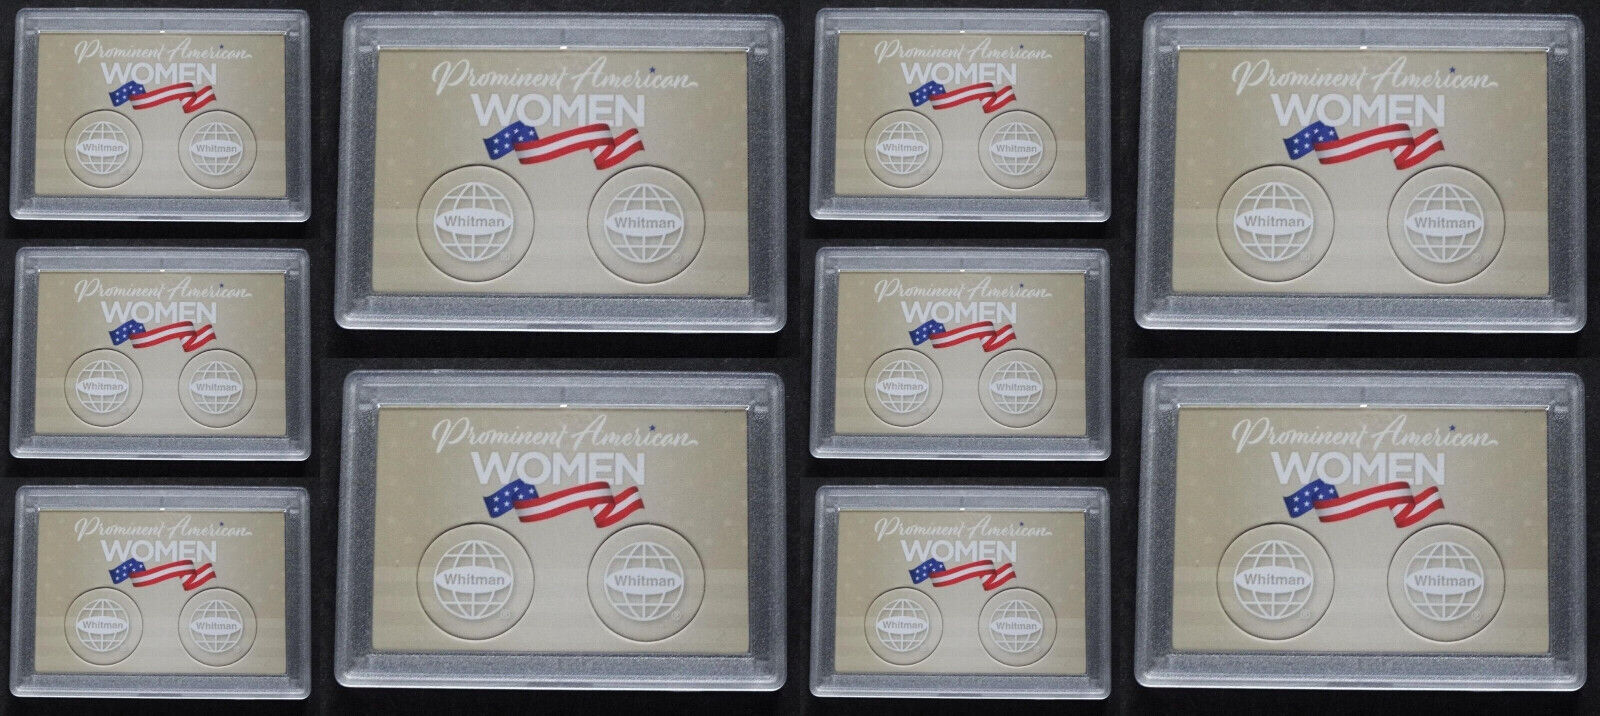 10 Prominent American Women Quarter Frosty Case Two Coin Holder 2X3 He Harris - $29.95